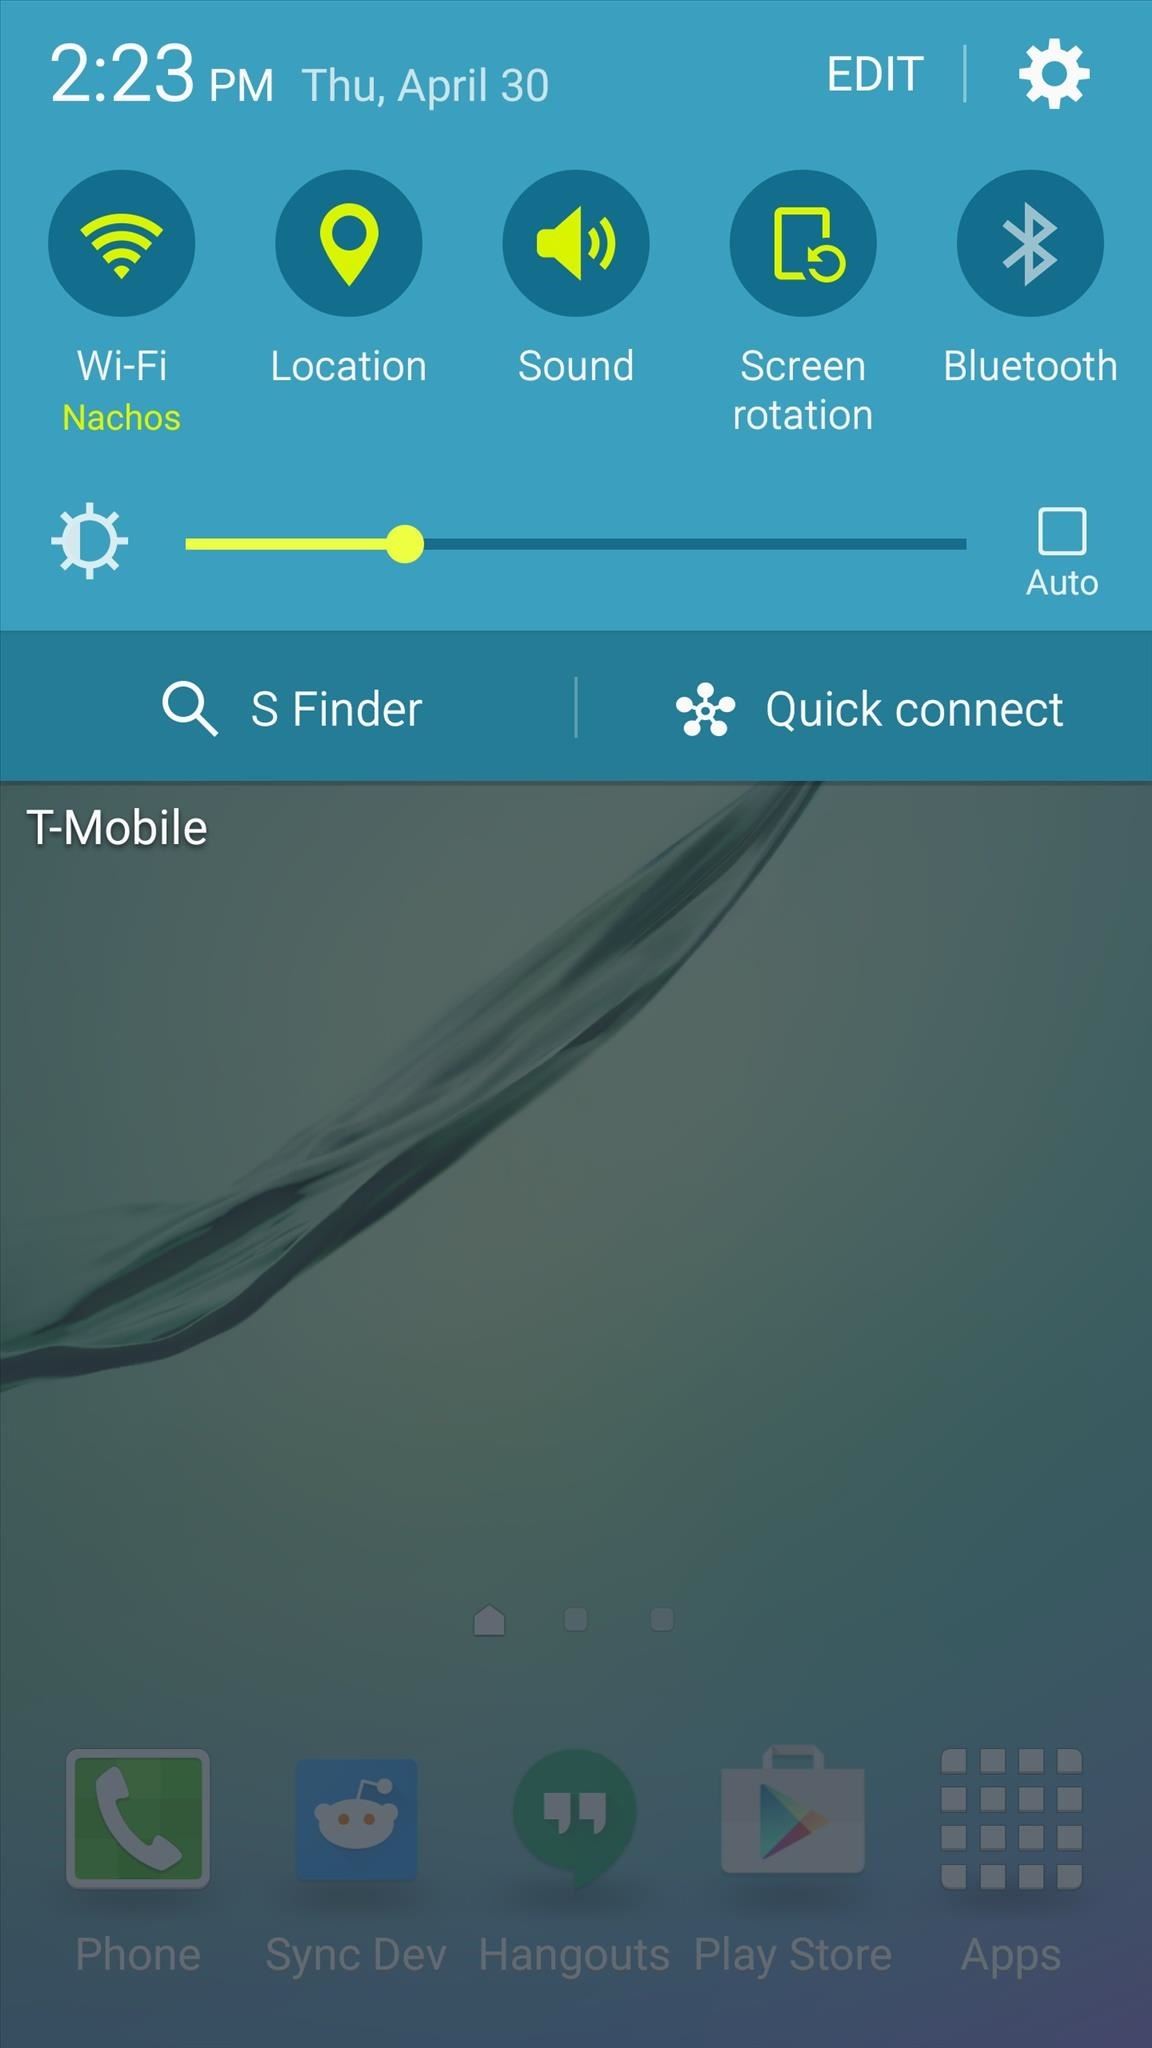 How to Remove the S Finder & Quick Connect Buttons from Your Galaxy S6's Notification Panel